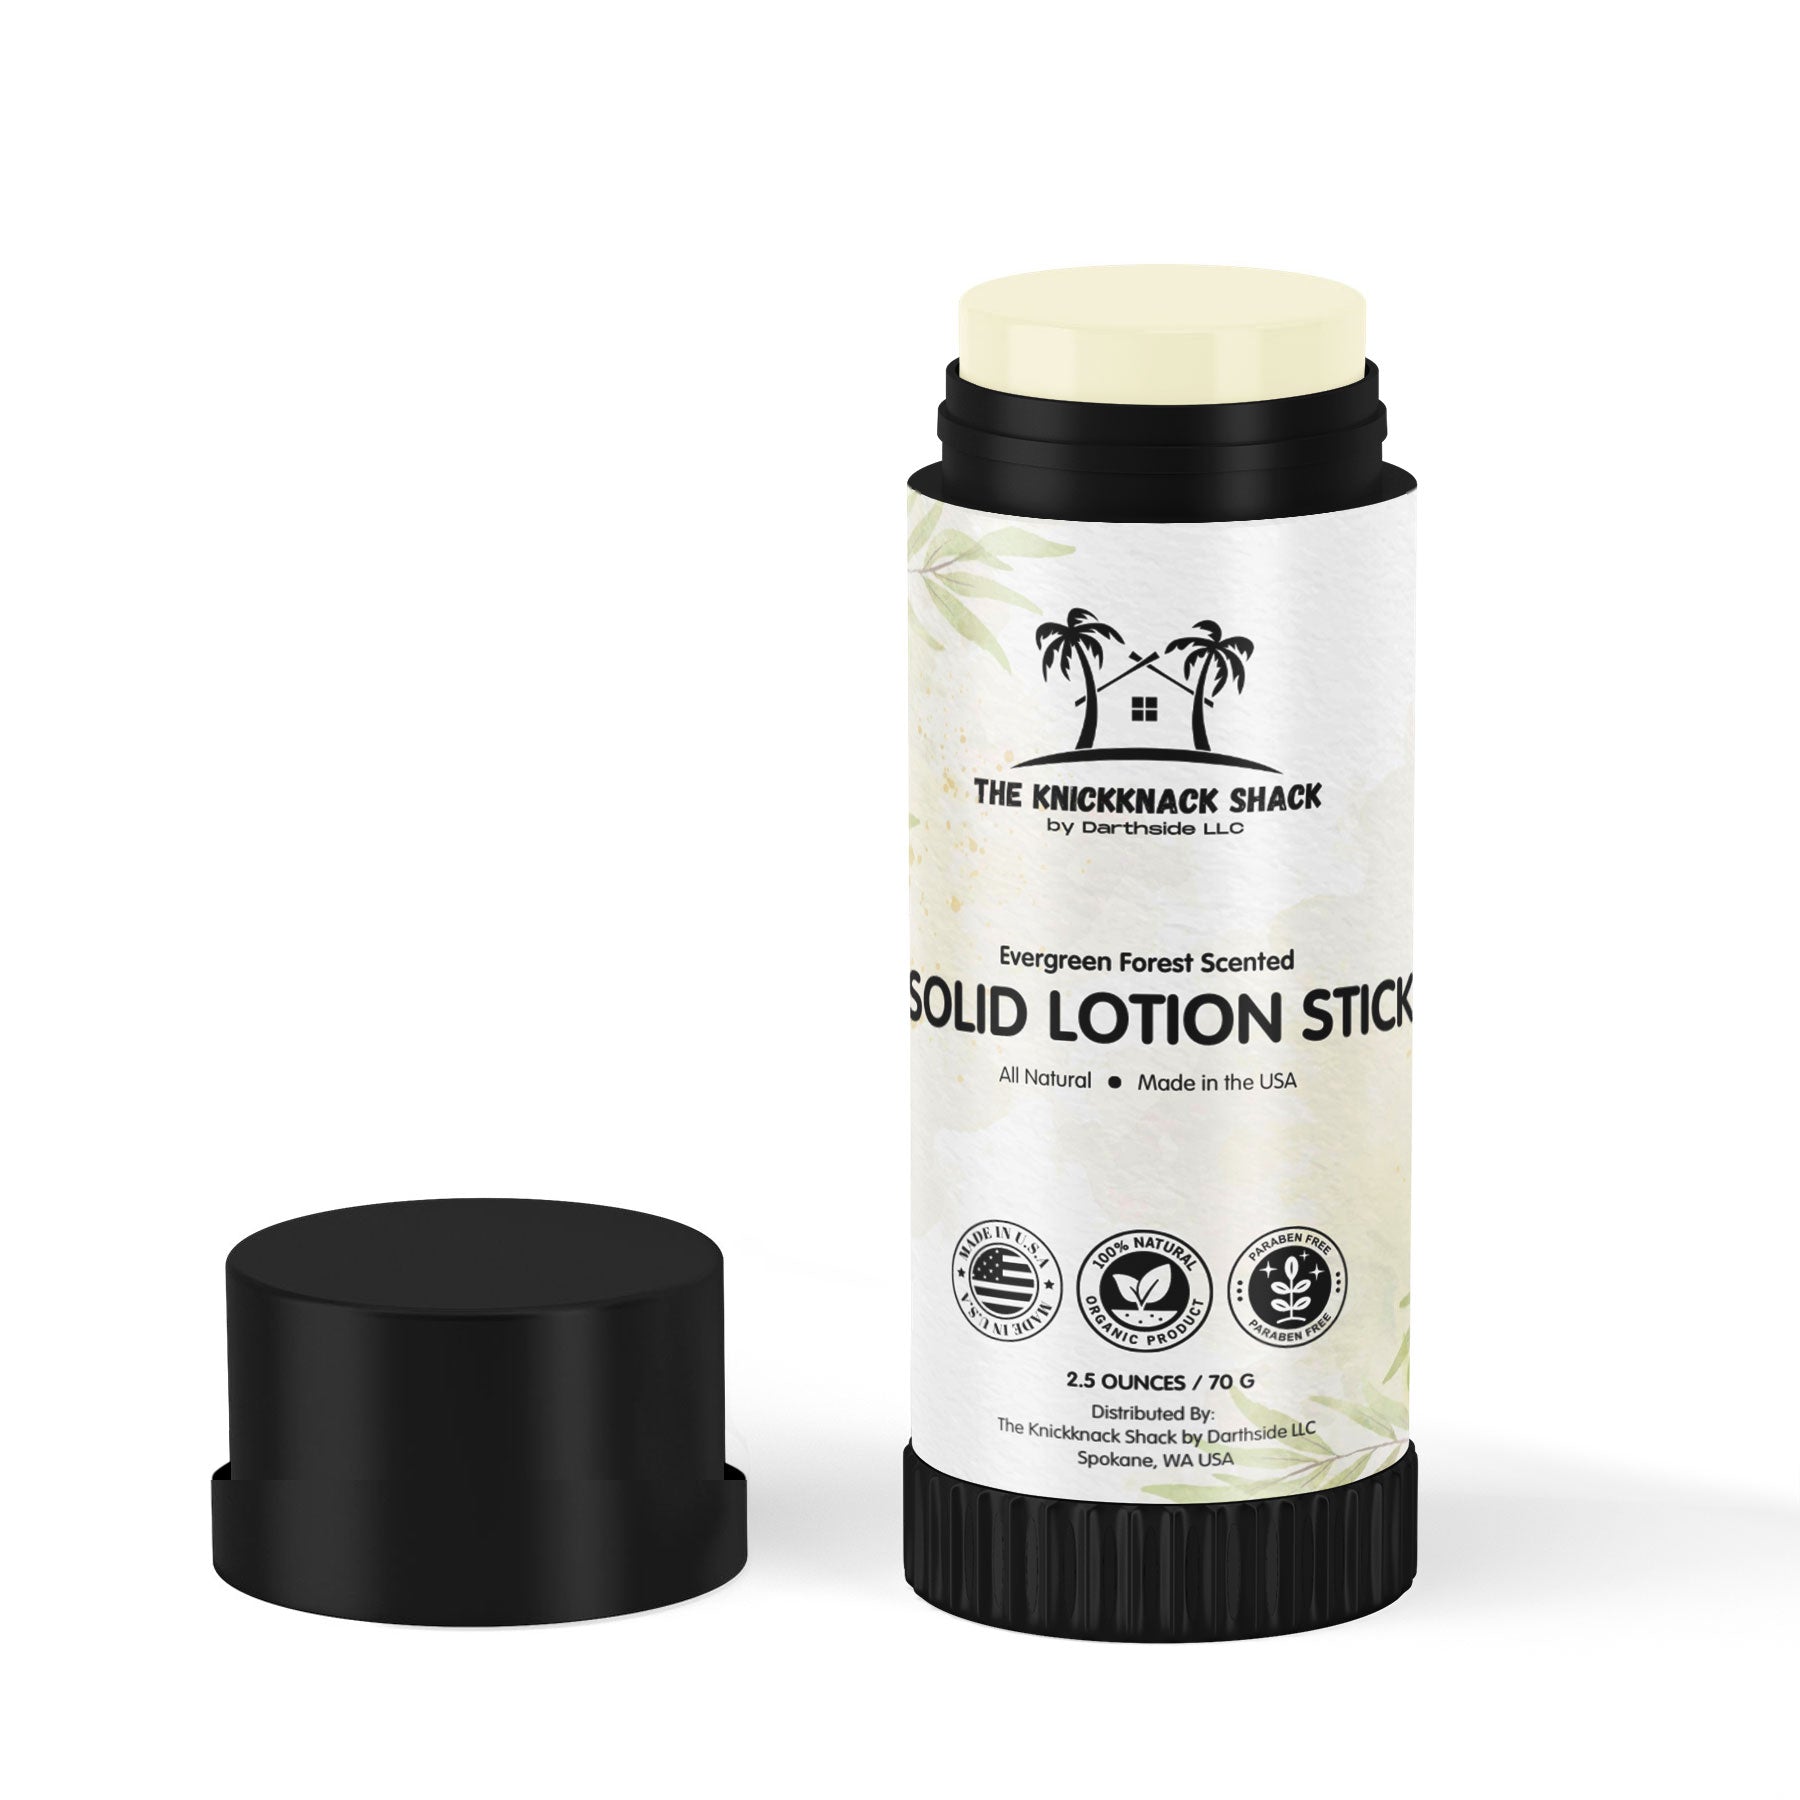 Evergreen Forest Scented Solid Lotion Stick